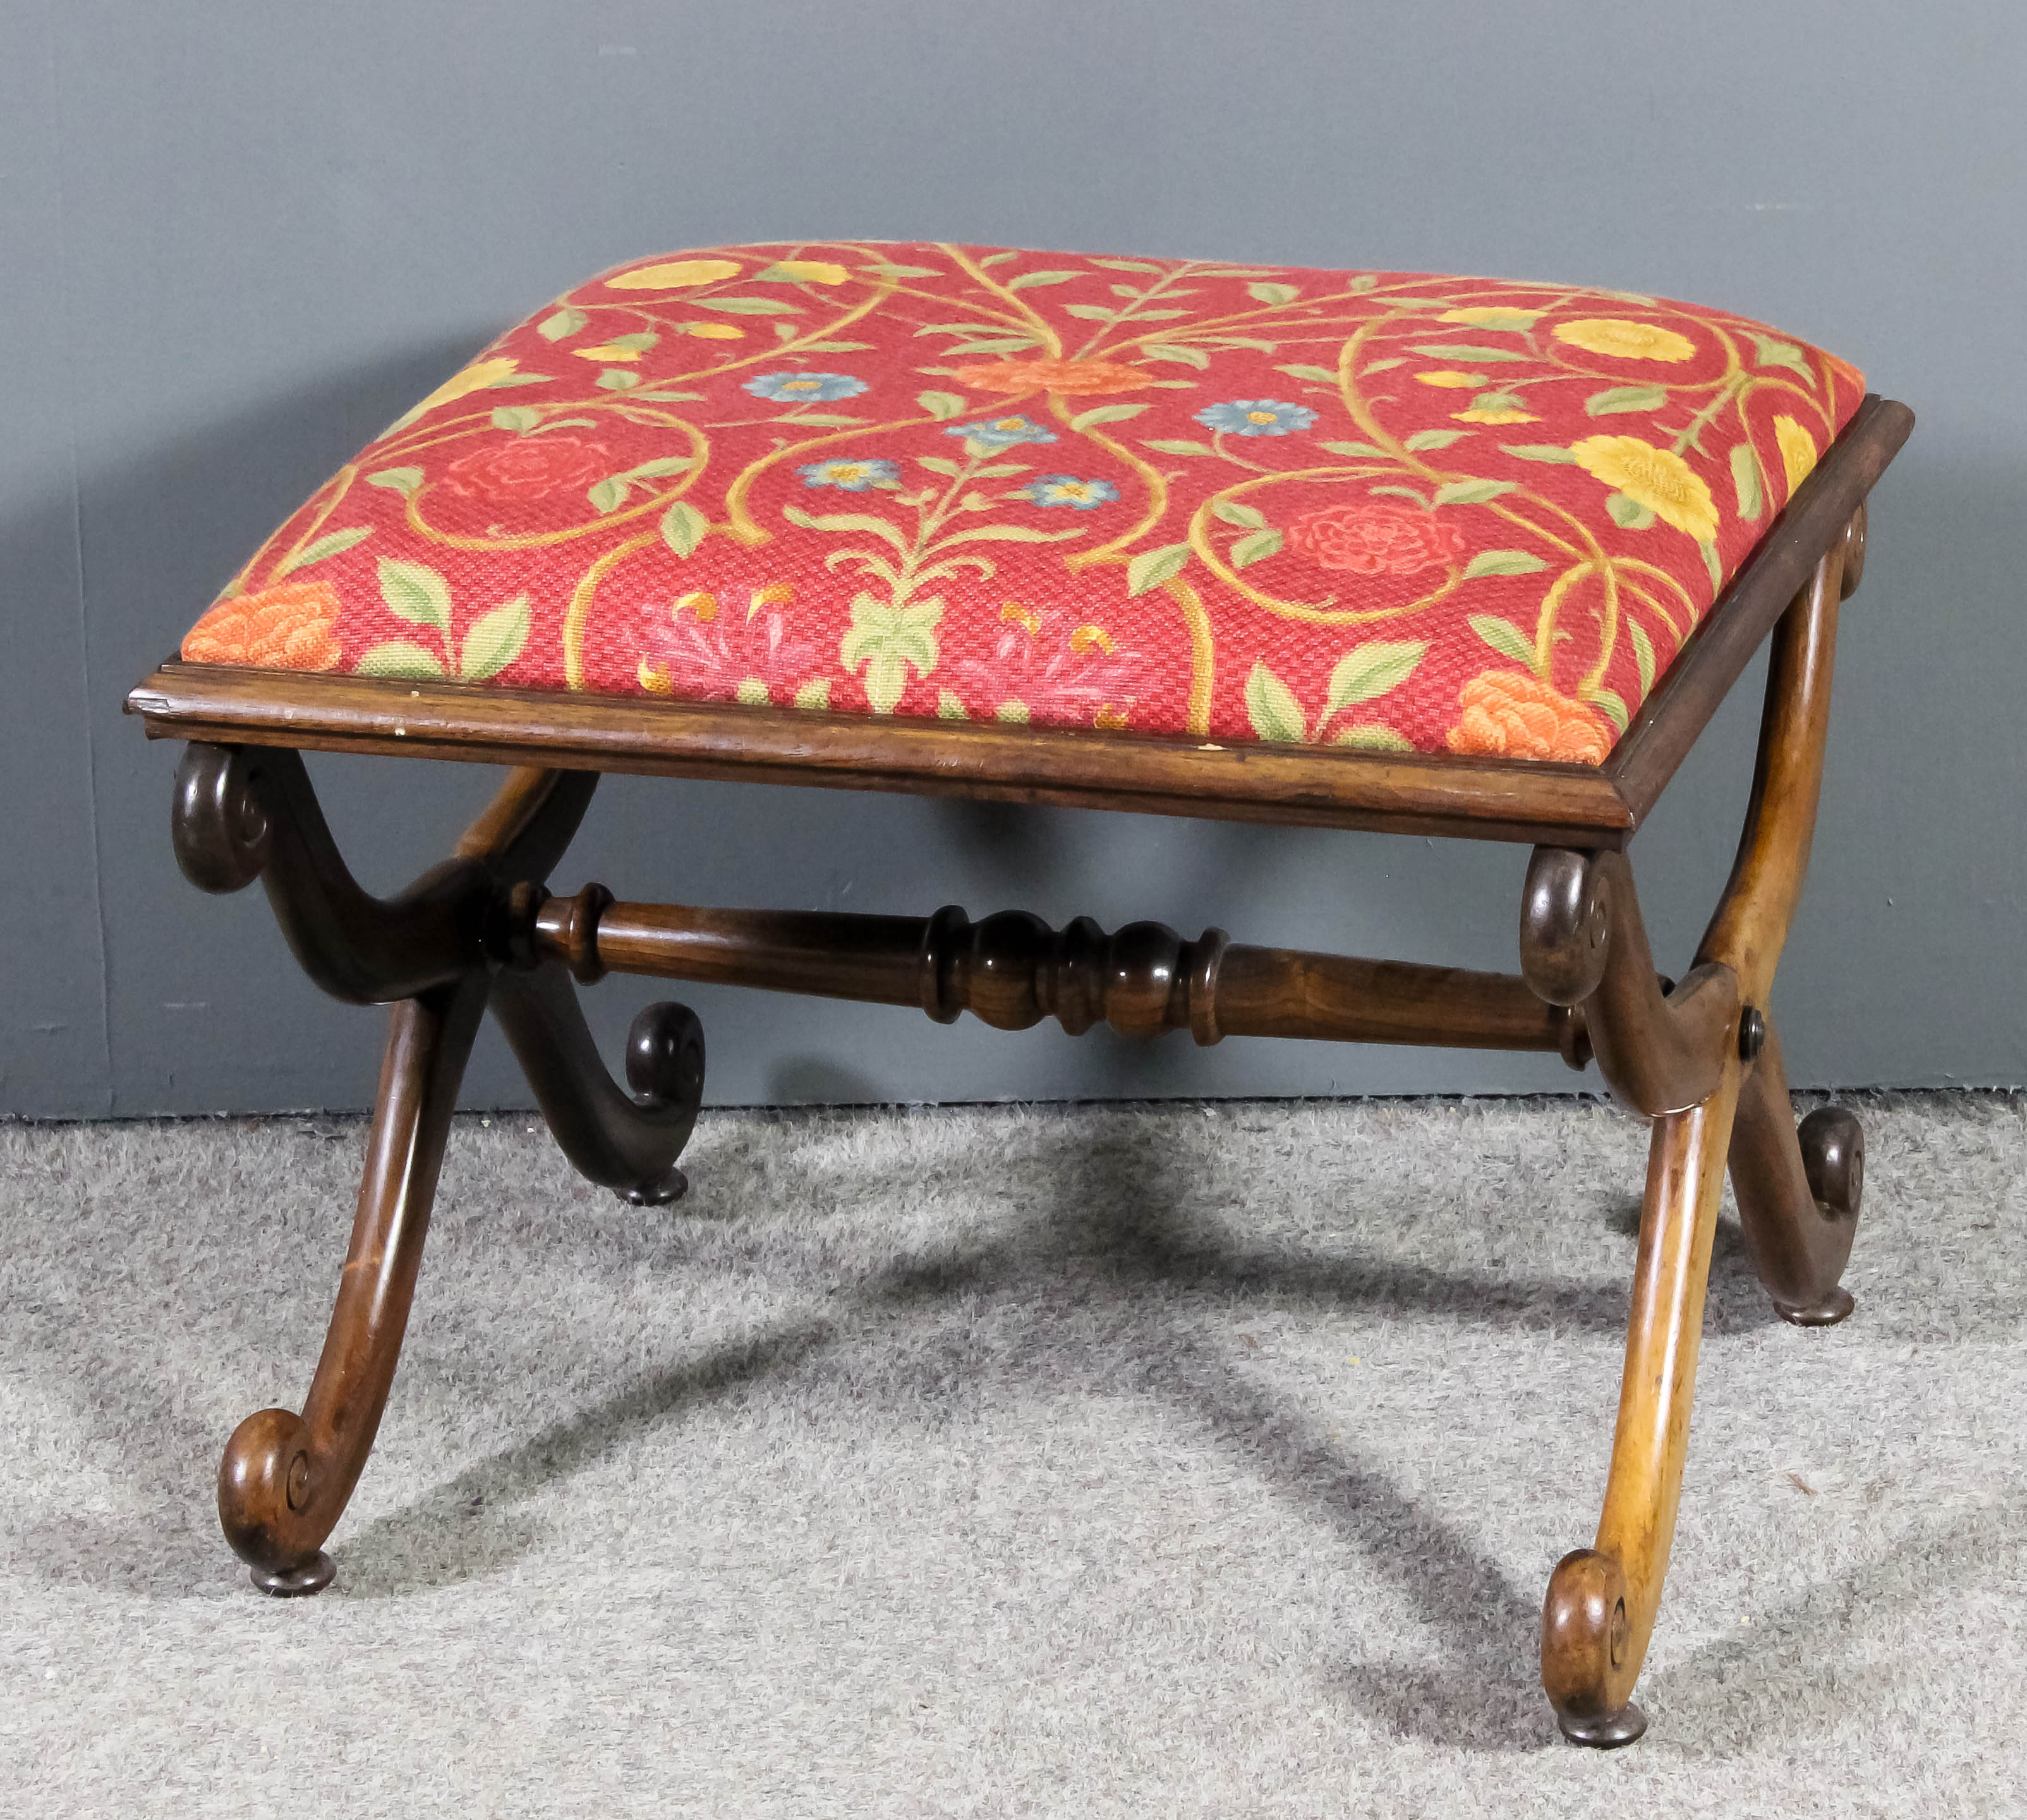 A William IV rosewood framed rectangular stool, the seat upholstered in red floral cloth, on X-